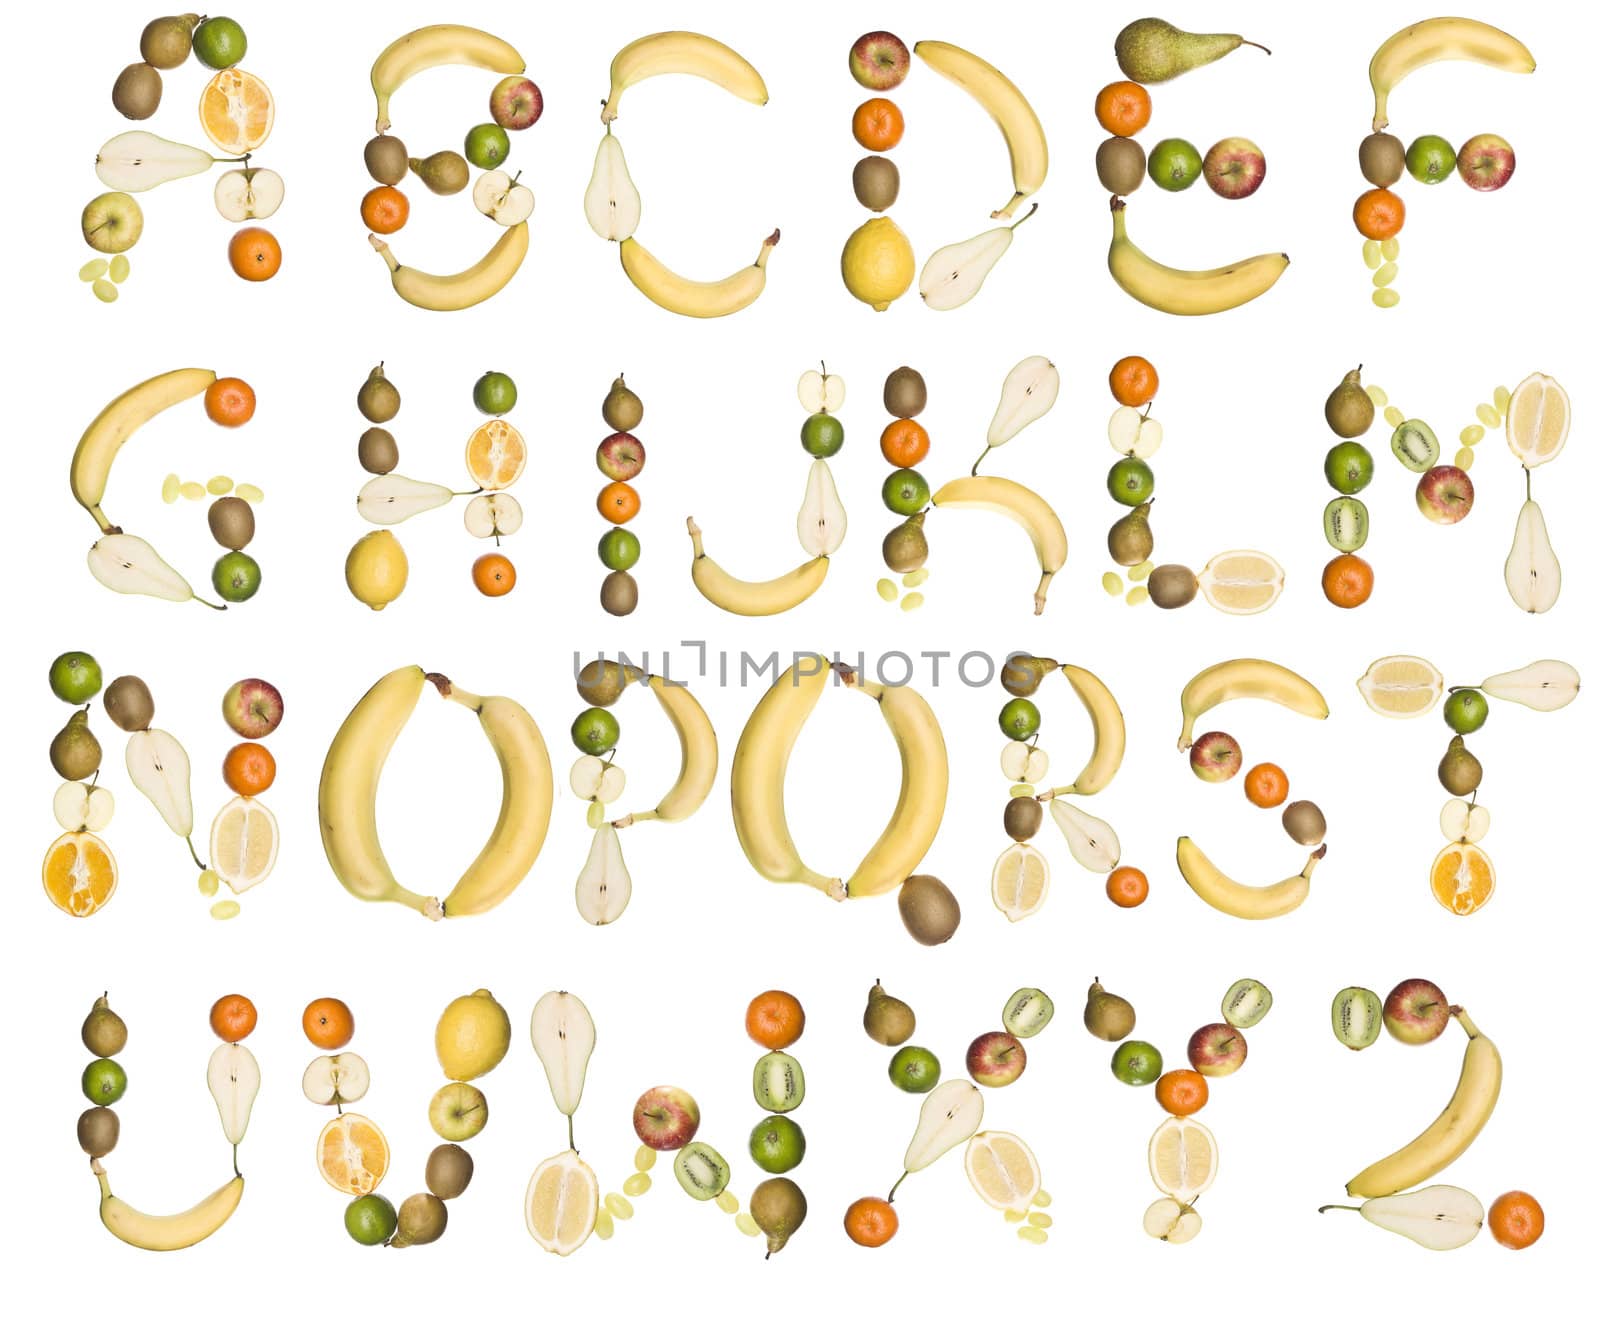 The Alphabet formed by fruits by gemenacom